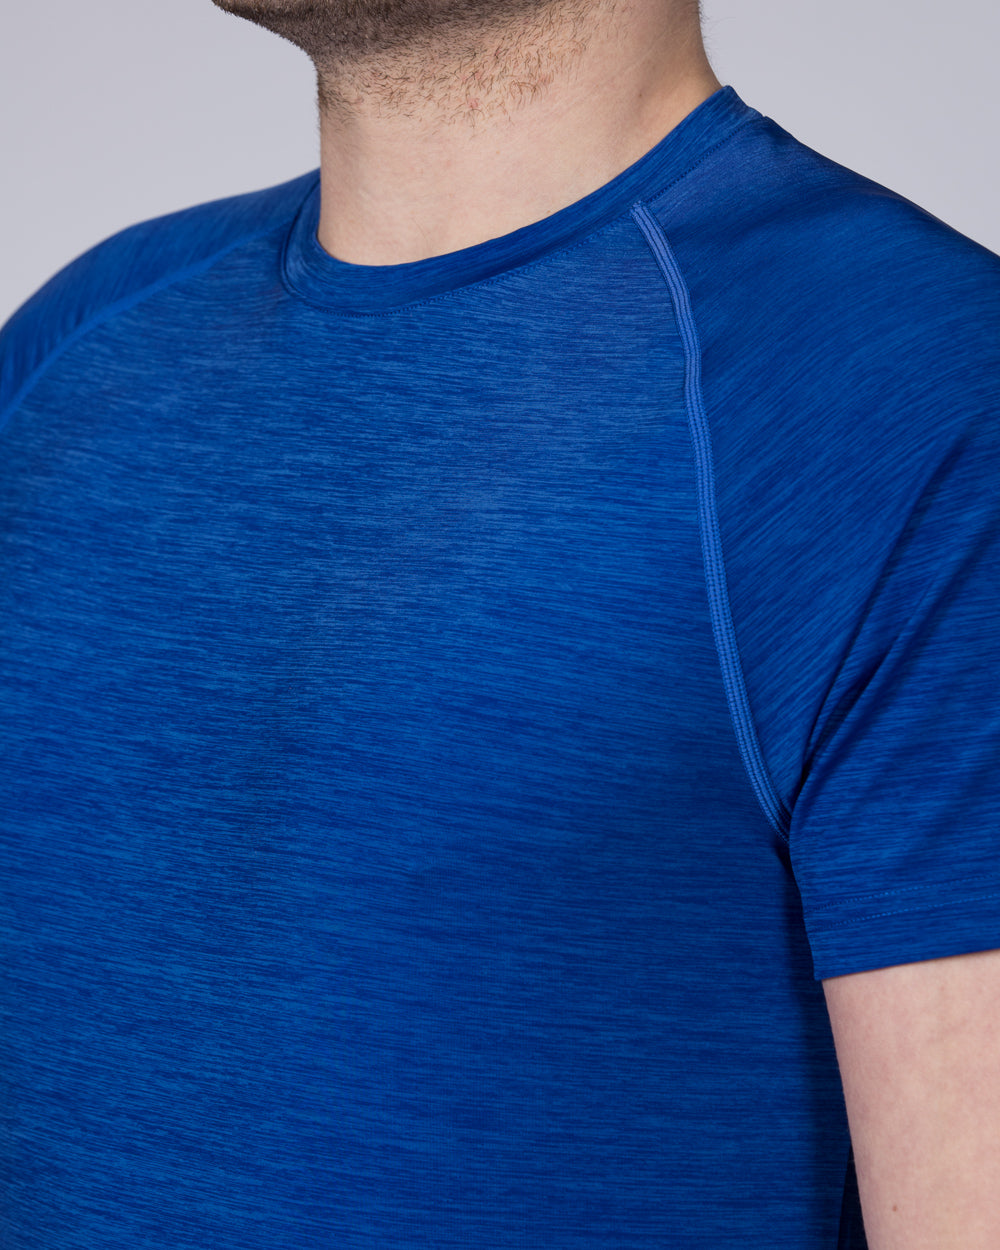 2t Tall Athletic Training Top (blue)